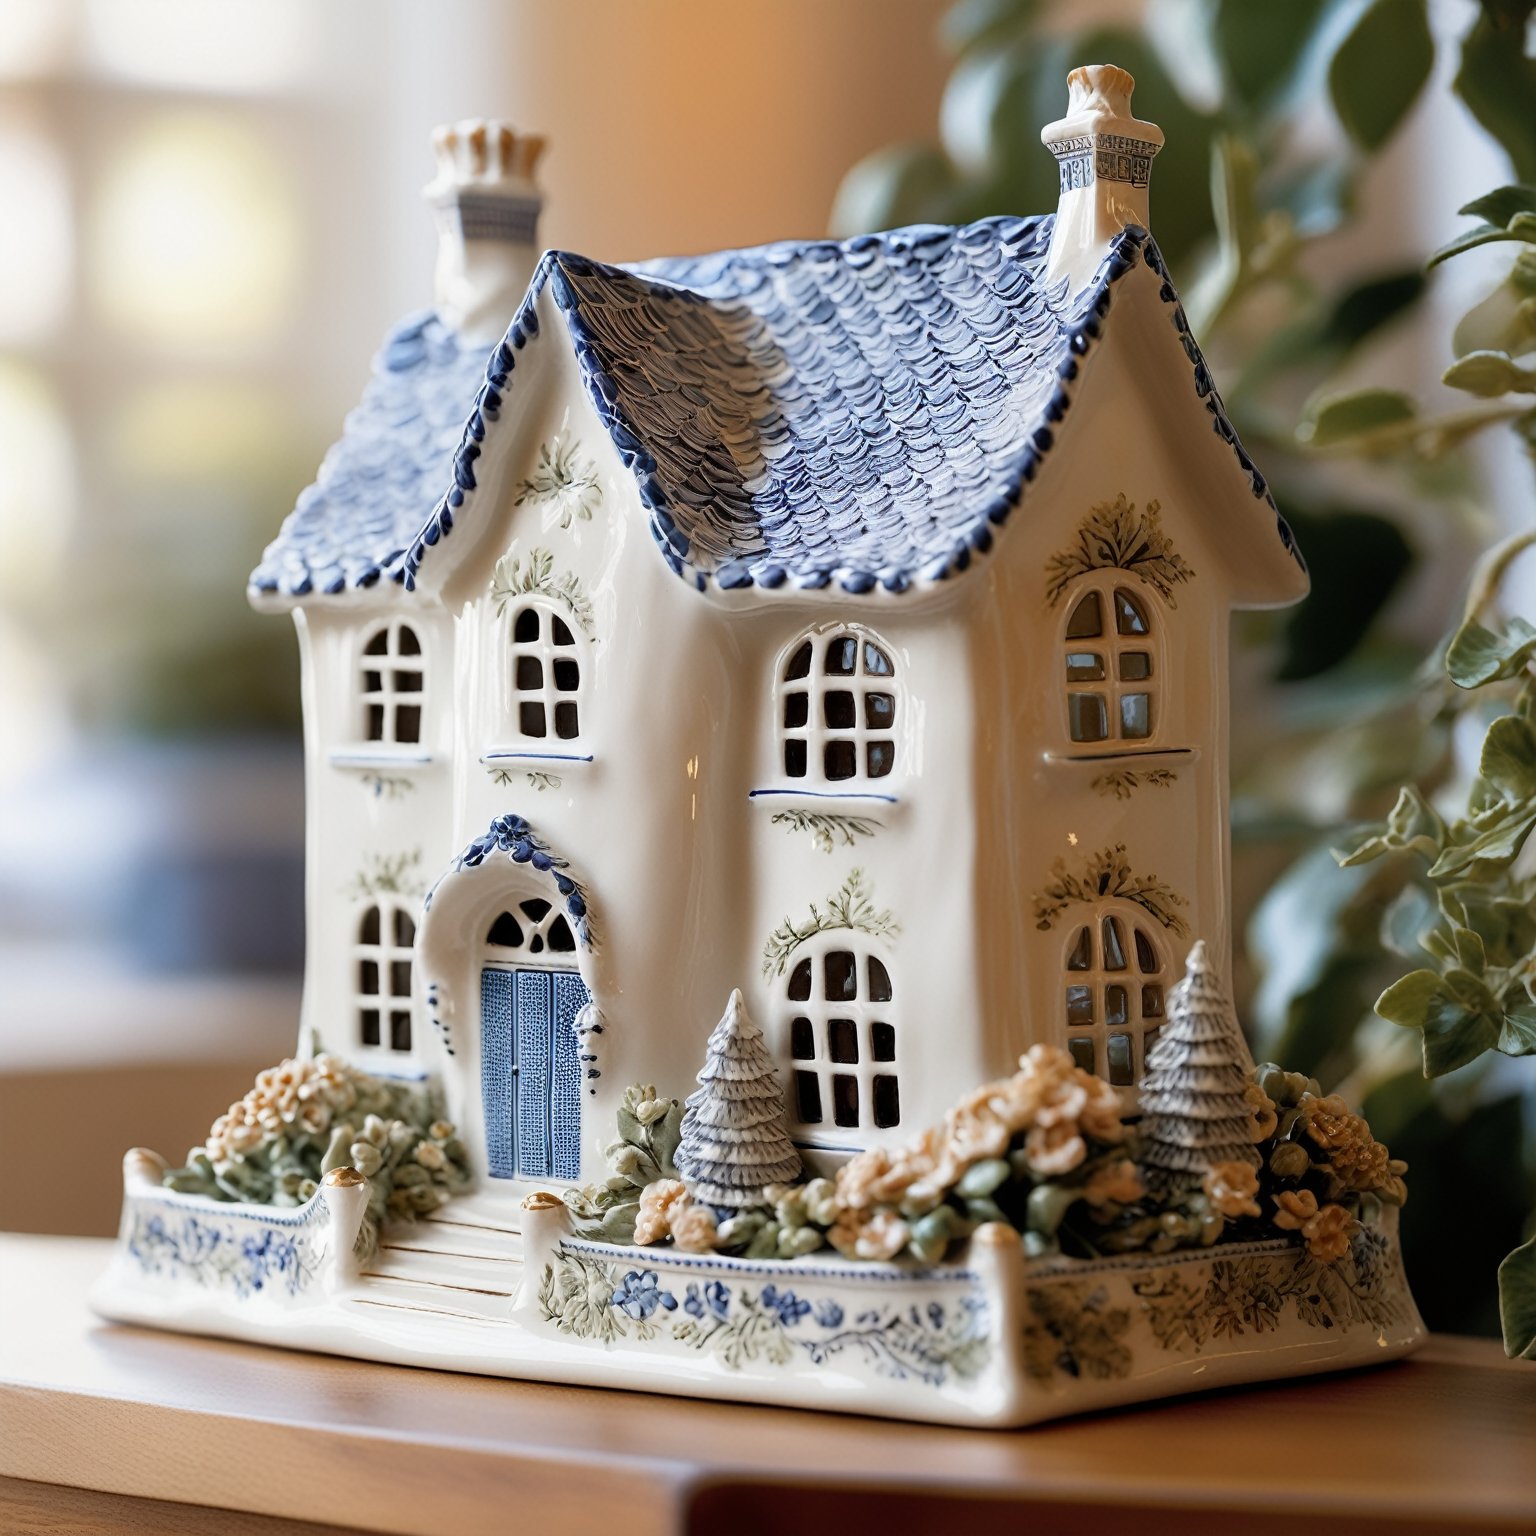 A beautifully crafted ceramic or porcelain figurine of a house